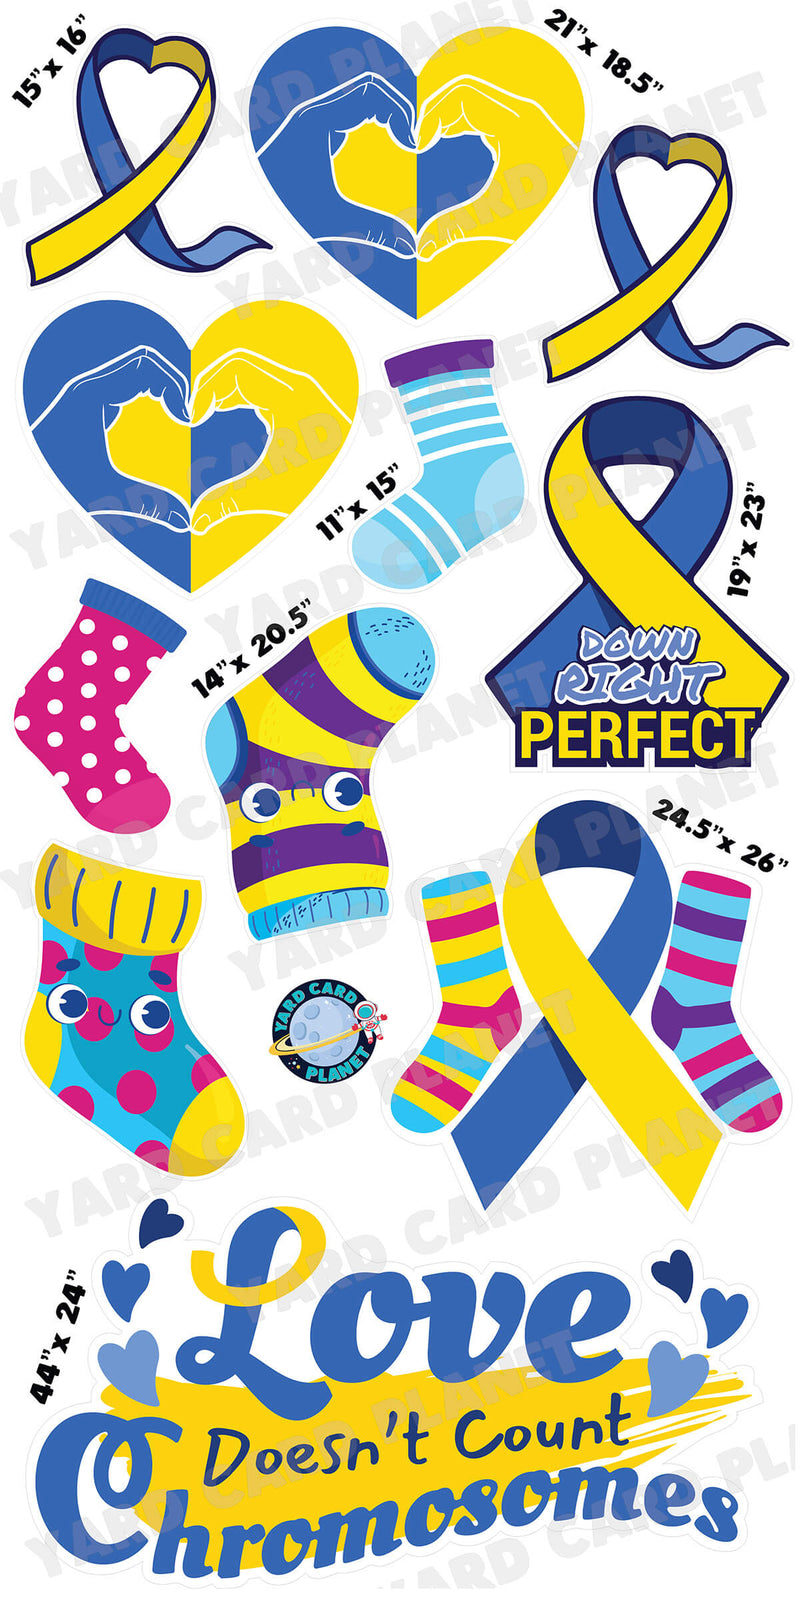 Down Syndrome Awareness EZ Quick Sign and Yard Card Flair Set with Measurements